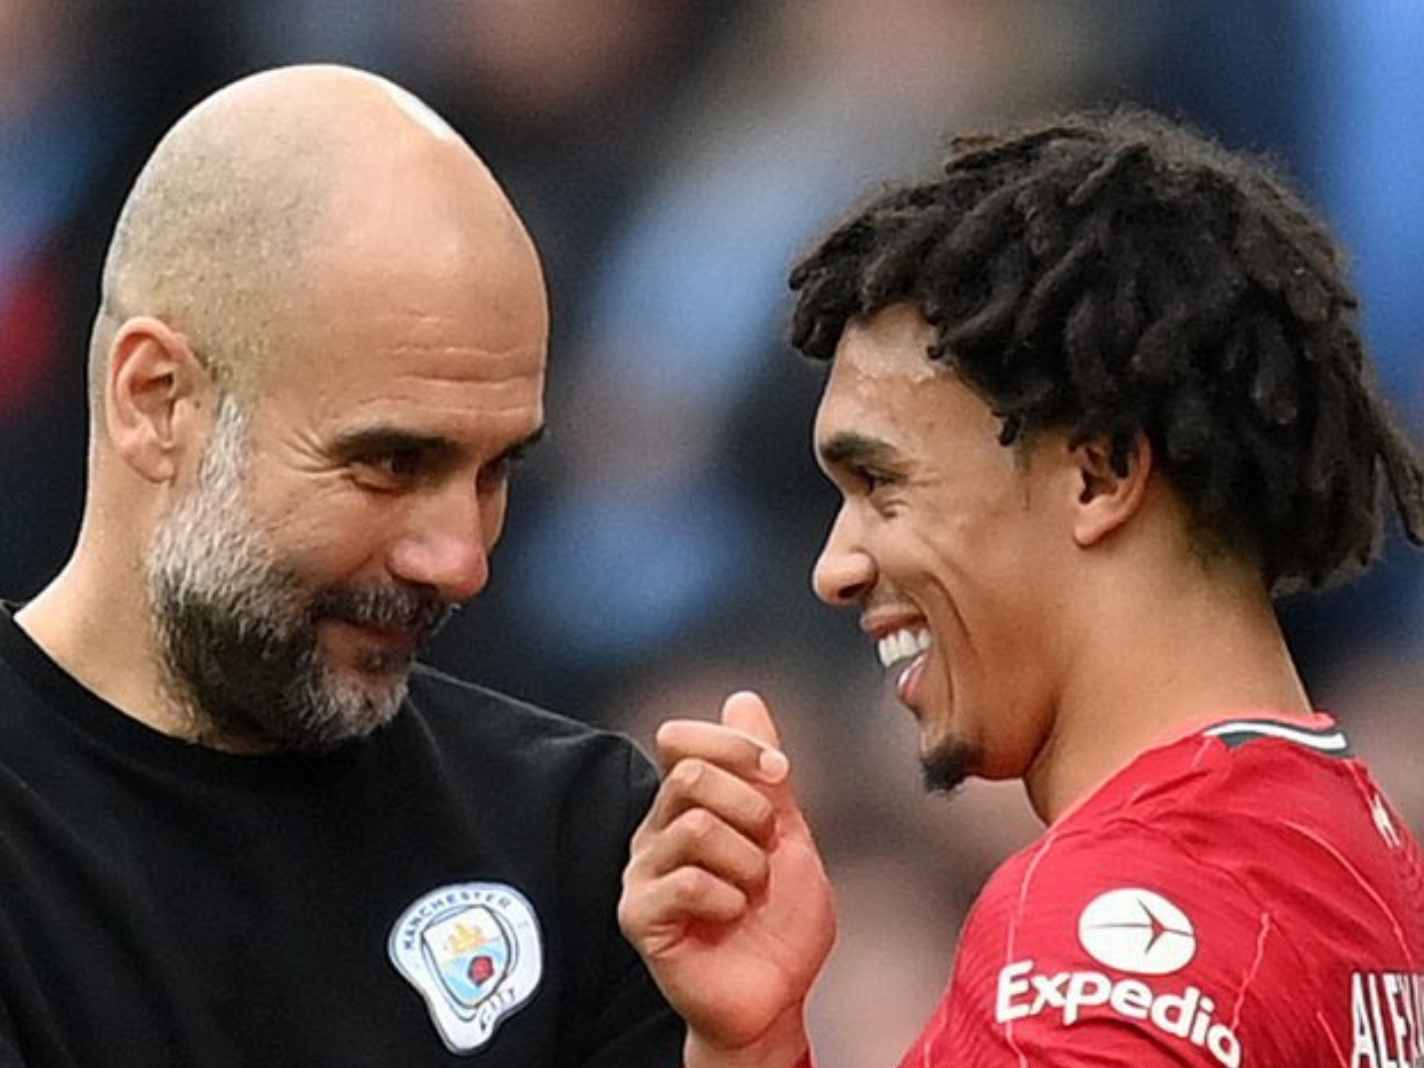 Lovely moment between Liverpool player Trent Alexander Arnold (right) and City gaffer Pep Guardiola